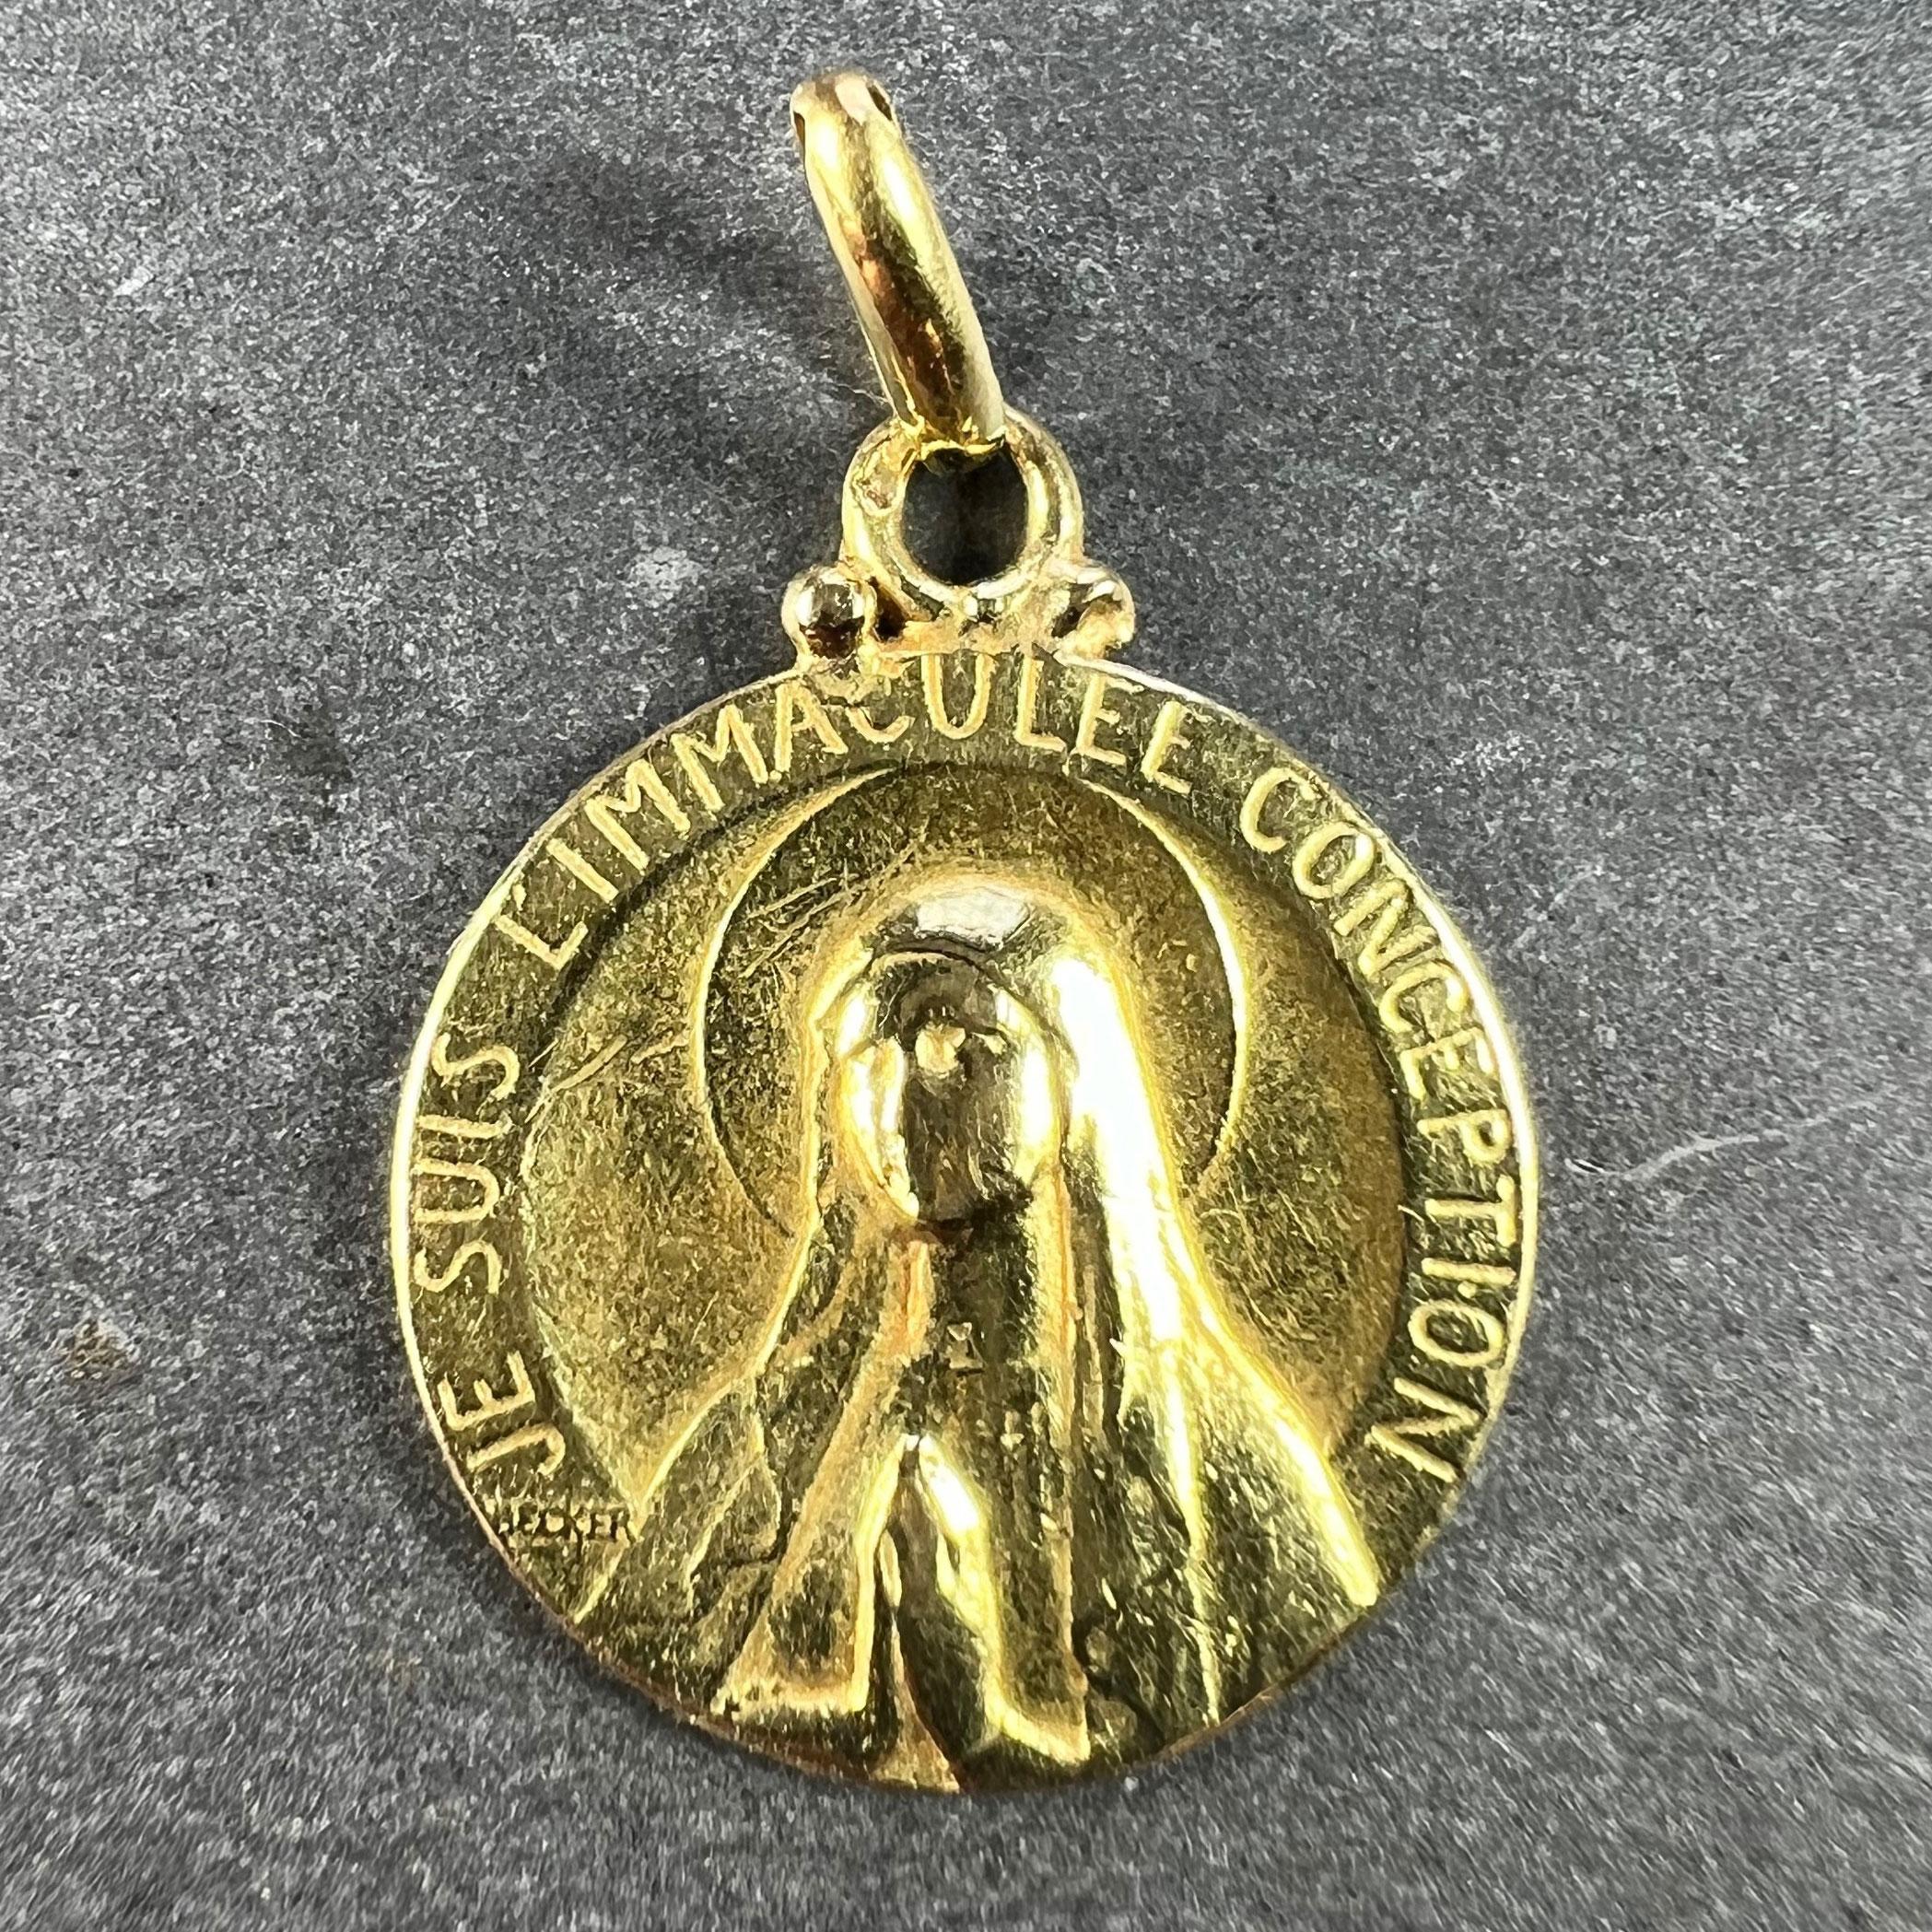 A French 18 karat (18K) yellow gold charm pendant depicting the Virgin Mary at prayer surrounded by the phrase 'JE SUIS L'IMMACULEE CONCEPTION'. The reverse depicts a relief of a wreath of roses. Signed Becker and stamped with the eagle mark for 18